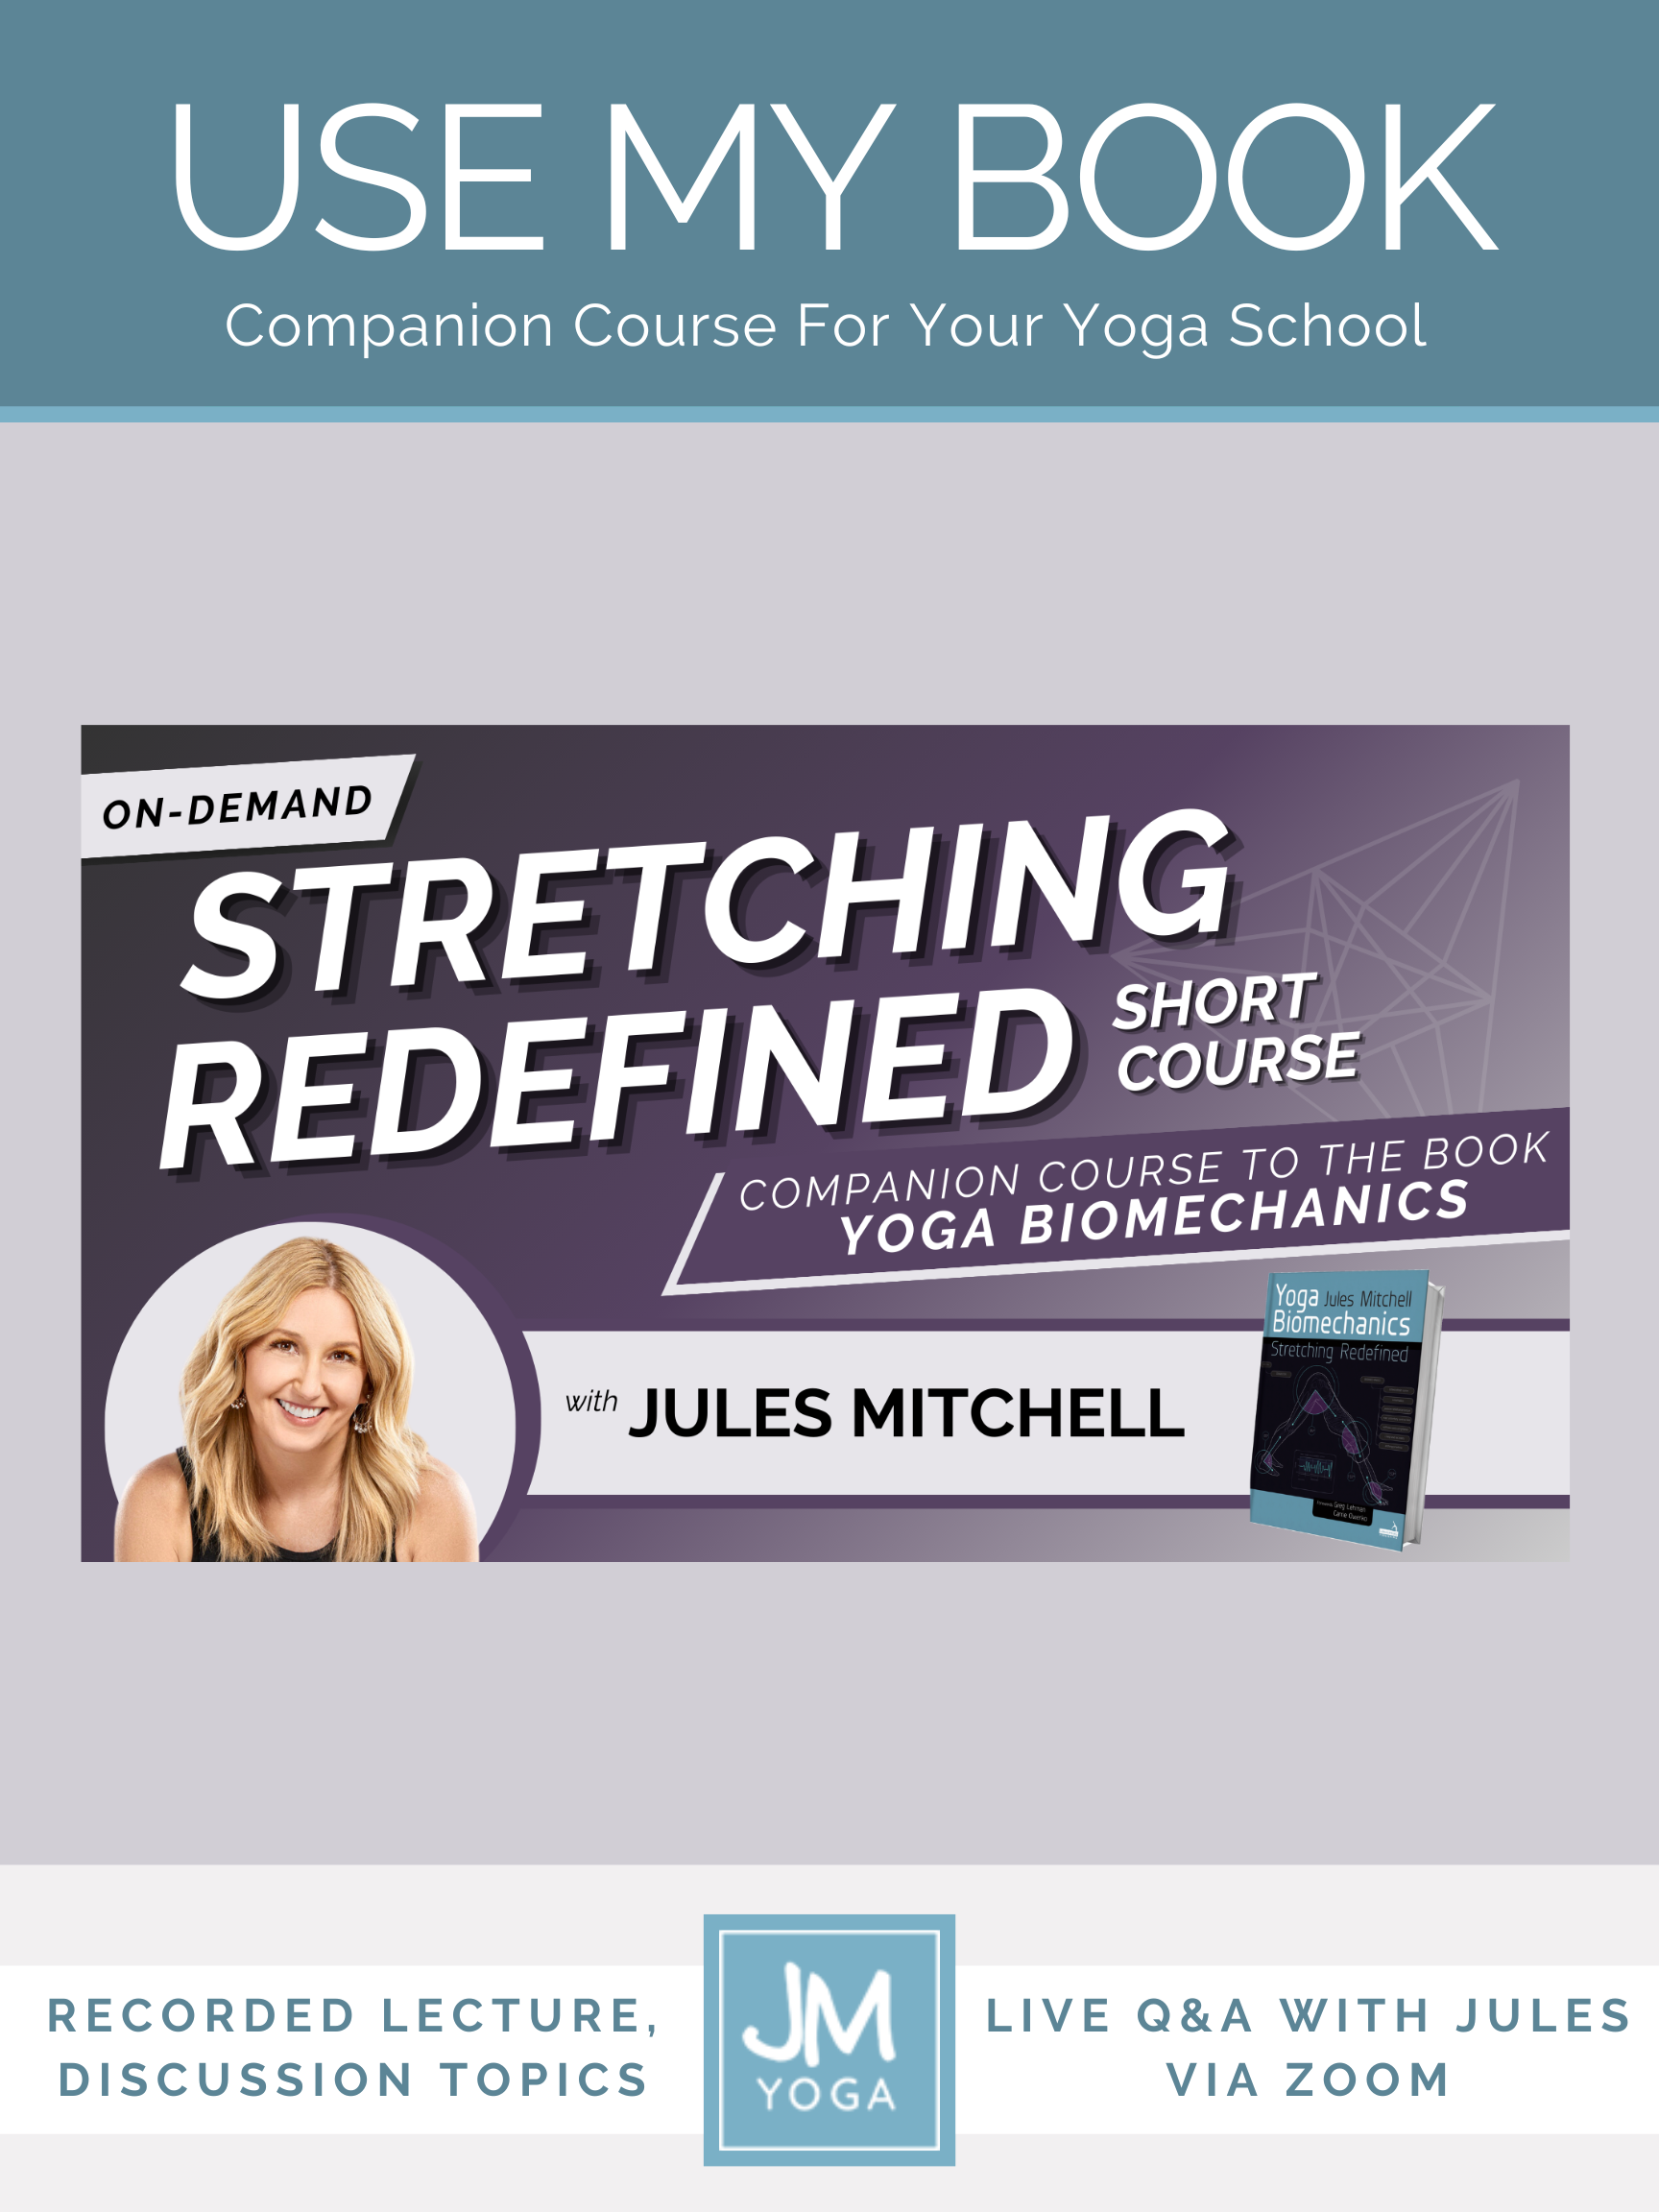 Jules Mitchell online companion course for her book for 300hr yoga teacher trainings